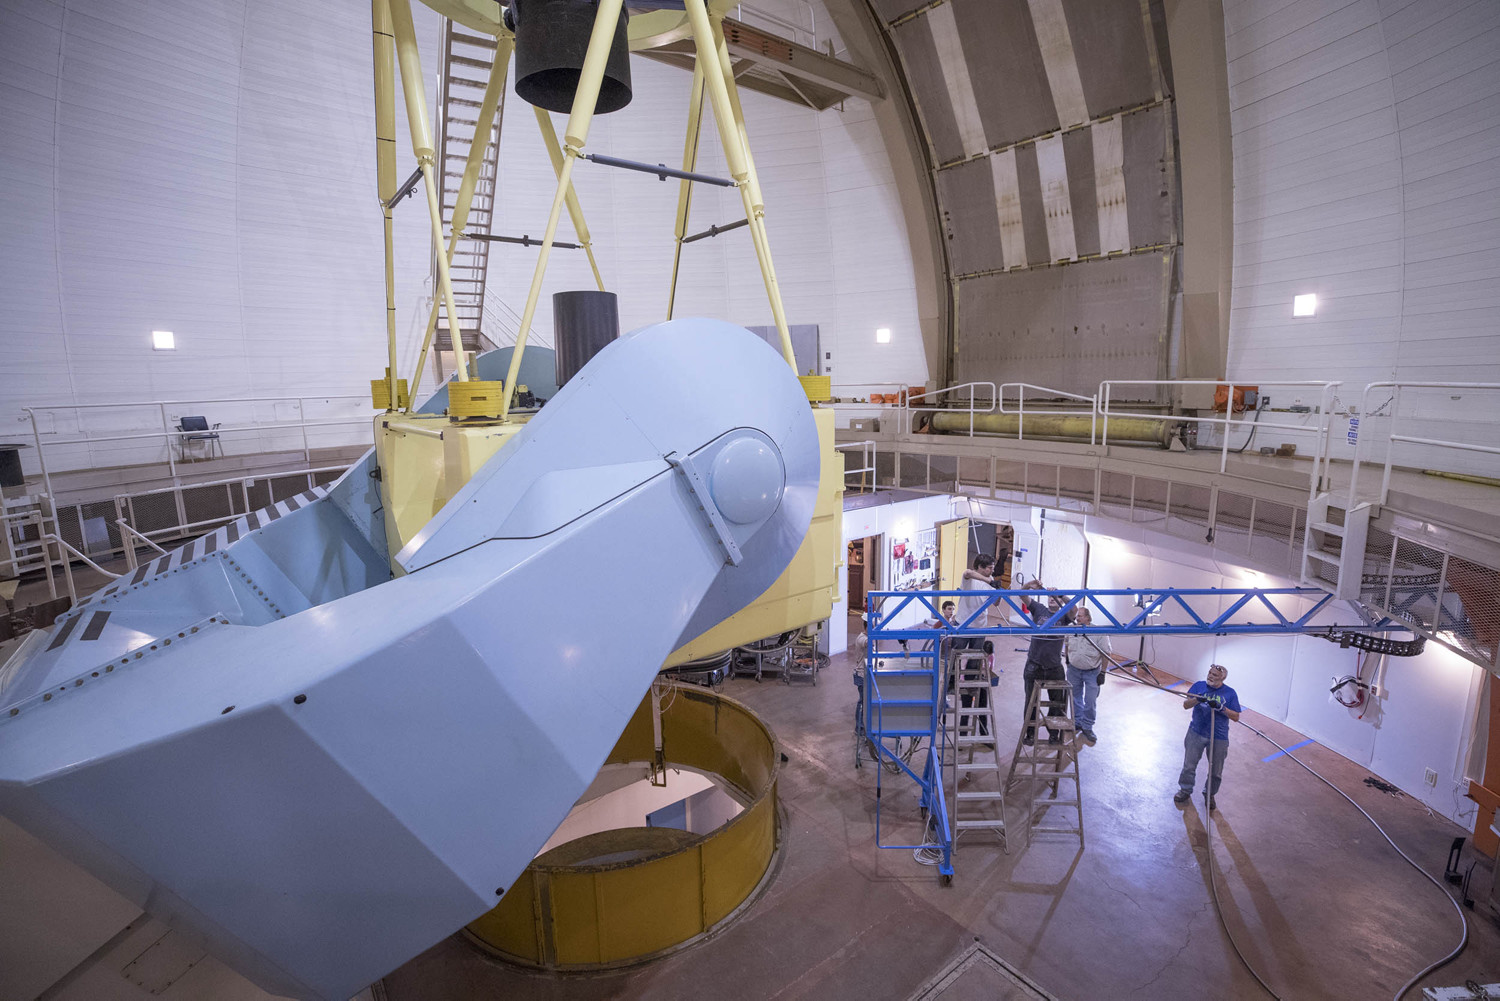 The team from UVA worked in the dome room of the telescope on the arm and connection for the spectrograph as part of the APOGEE project. 